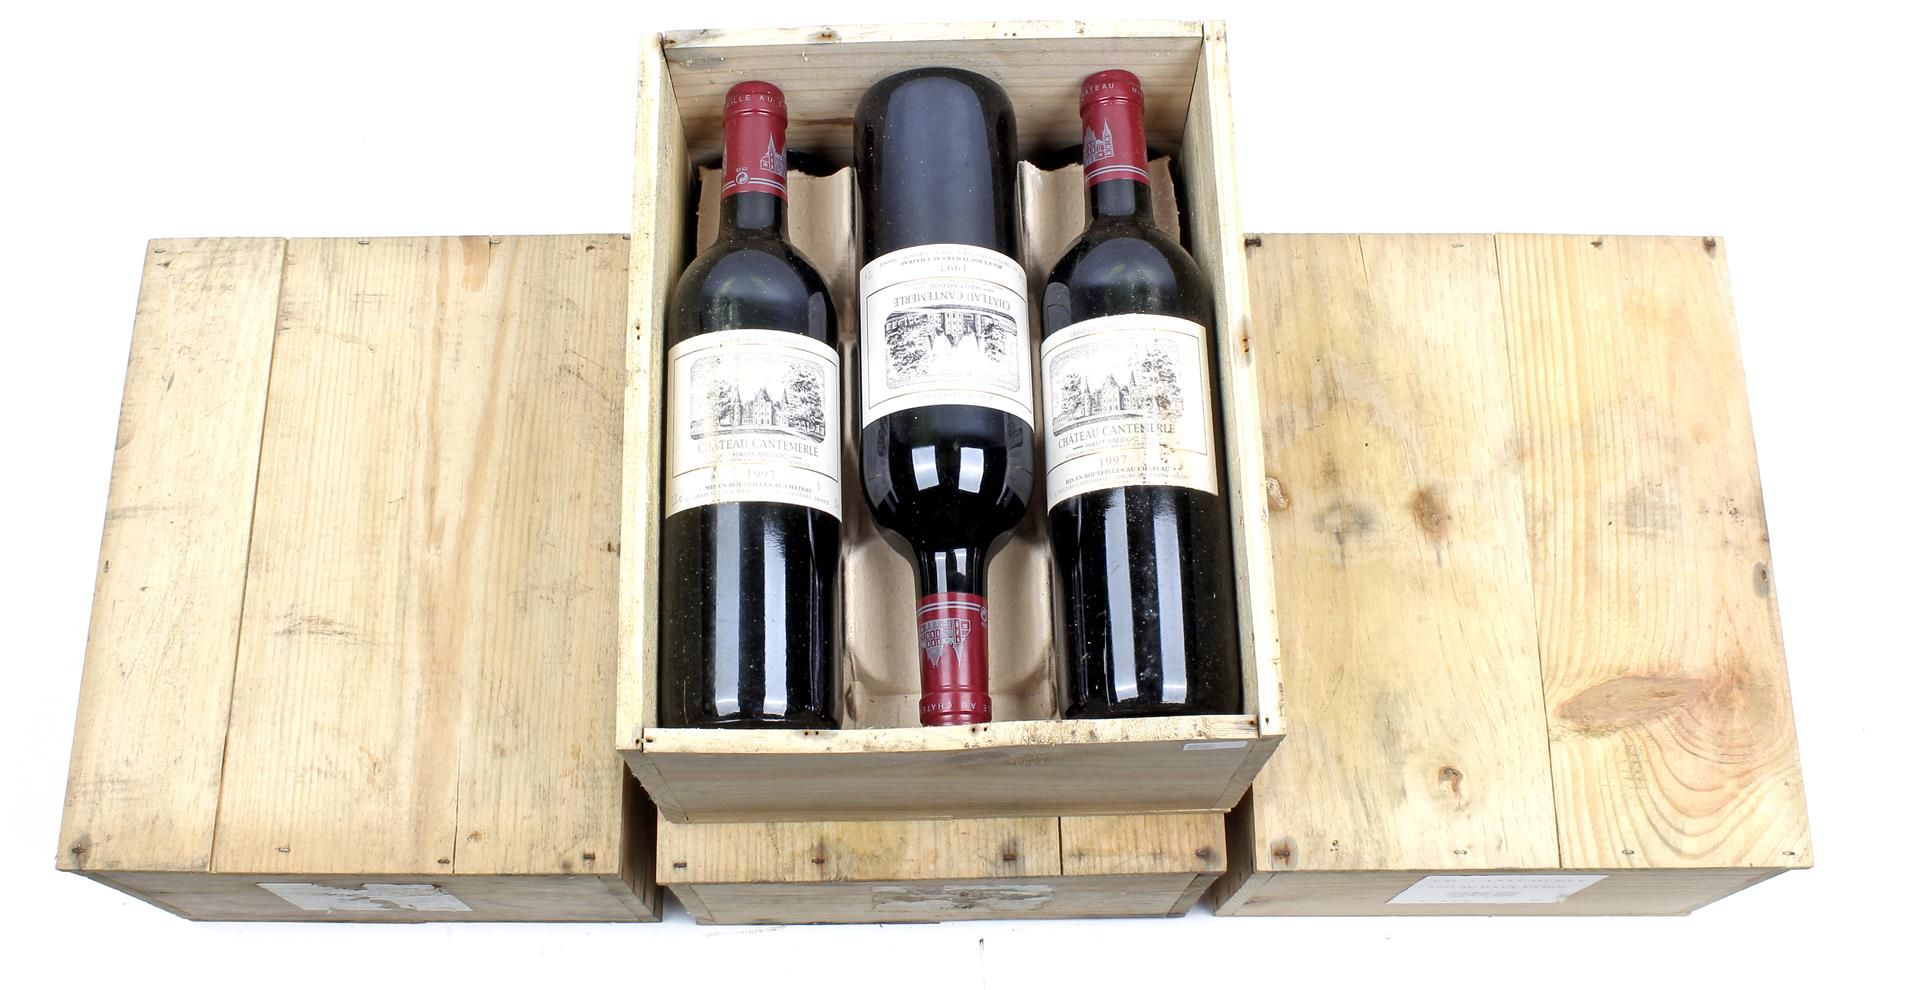 24 bottles of Chateau Cantemerle Haut Medoc 1997